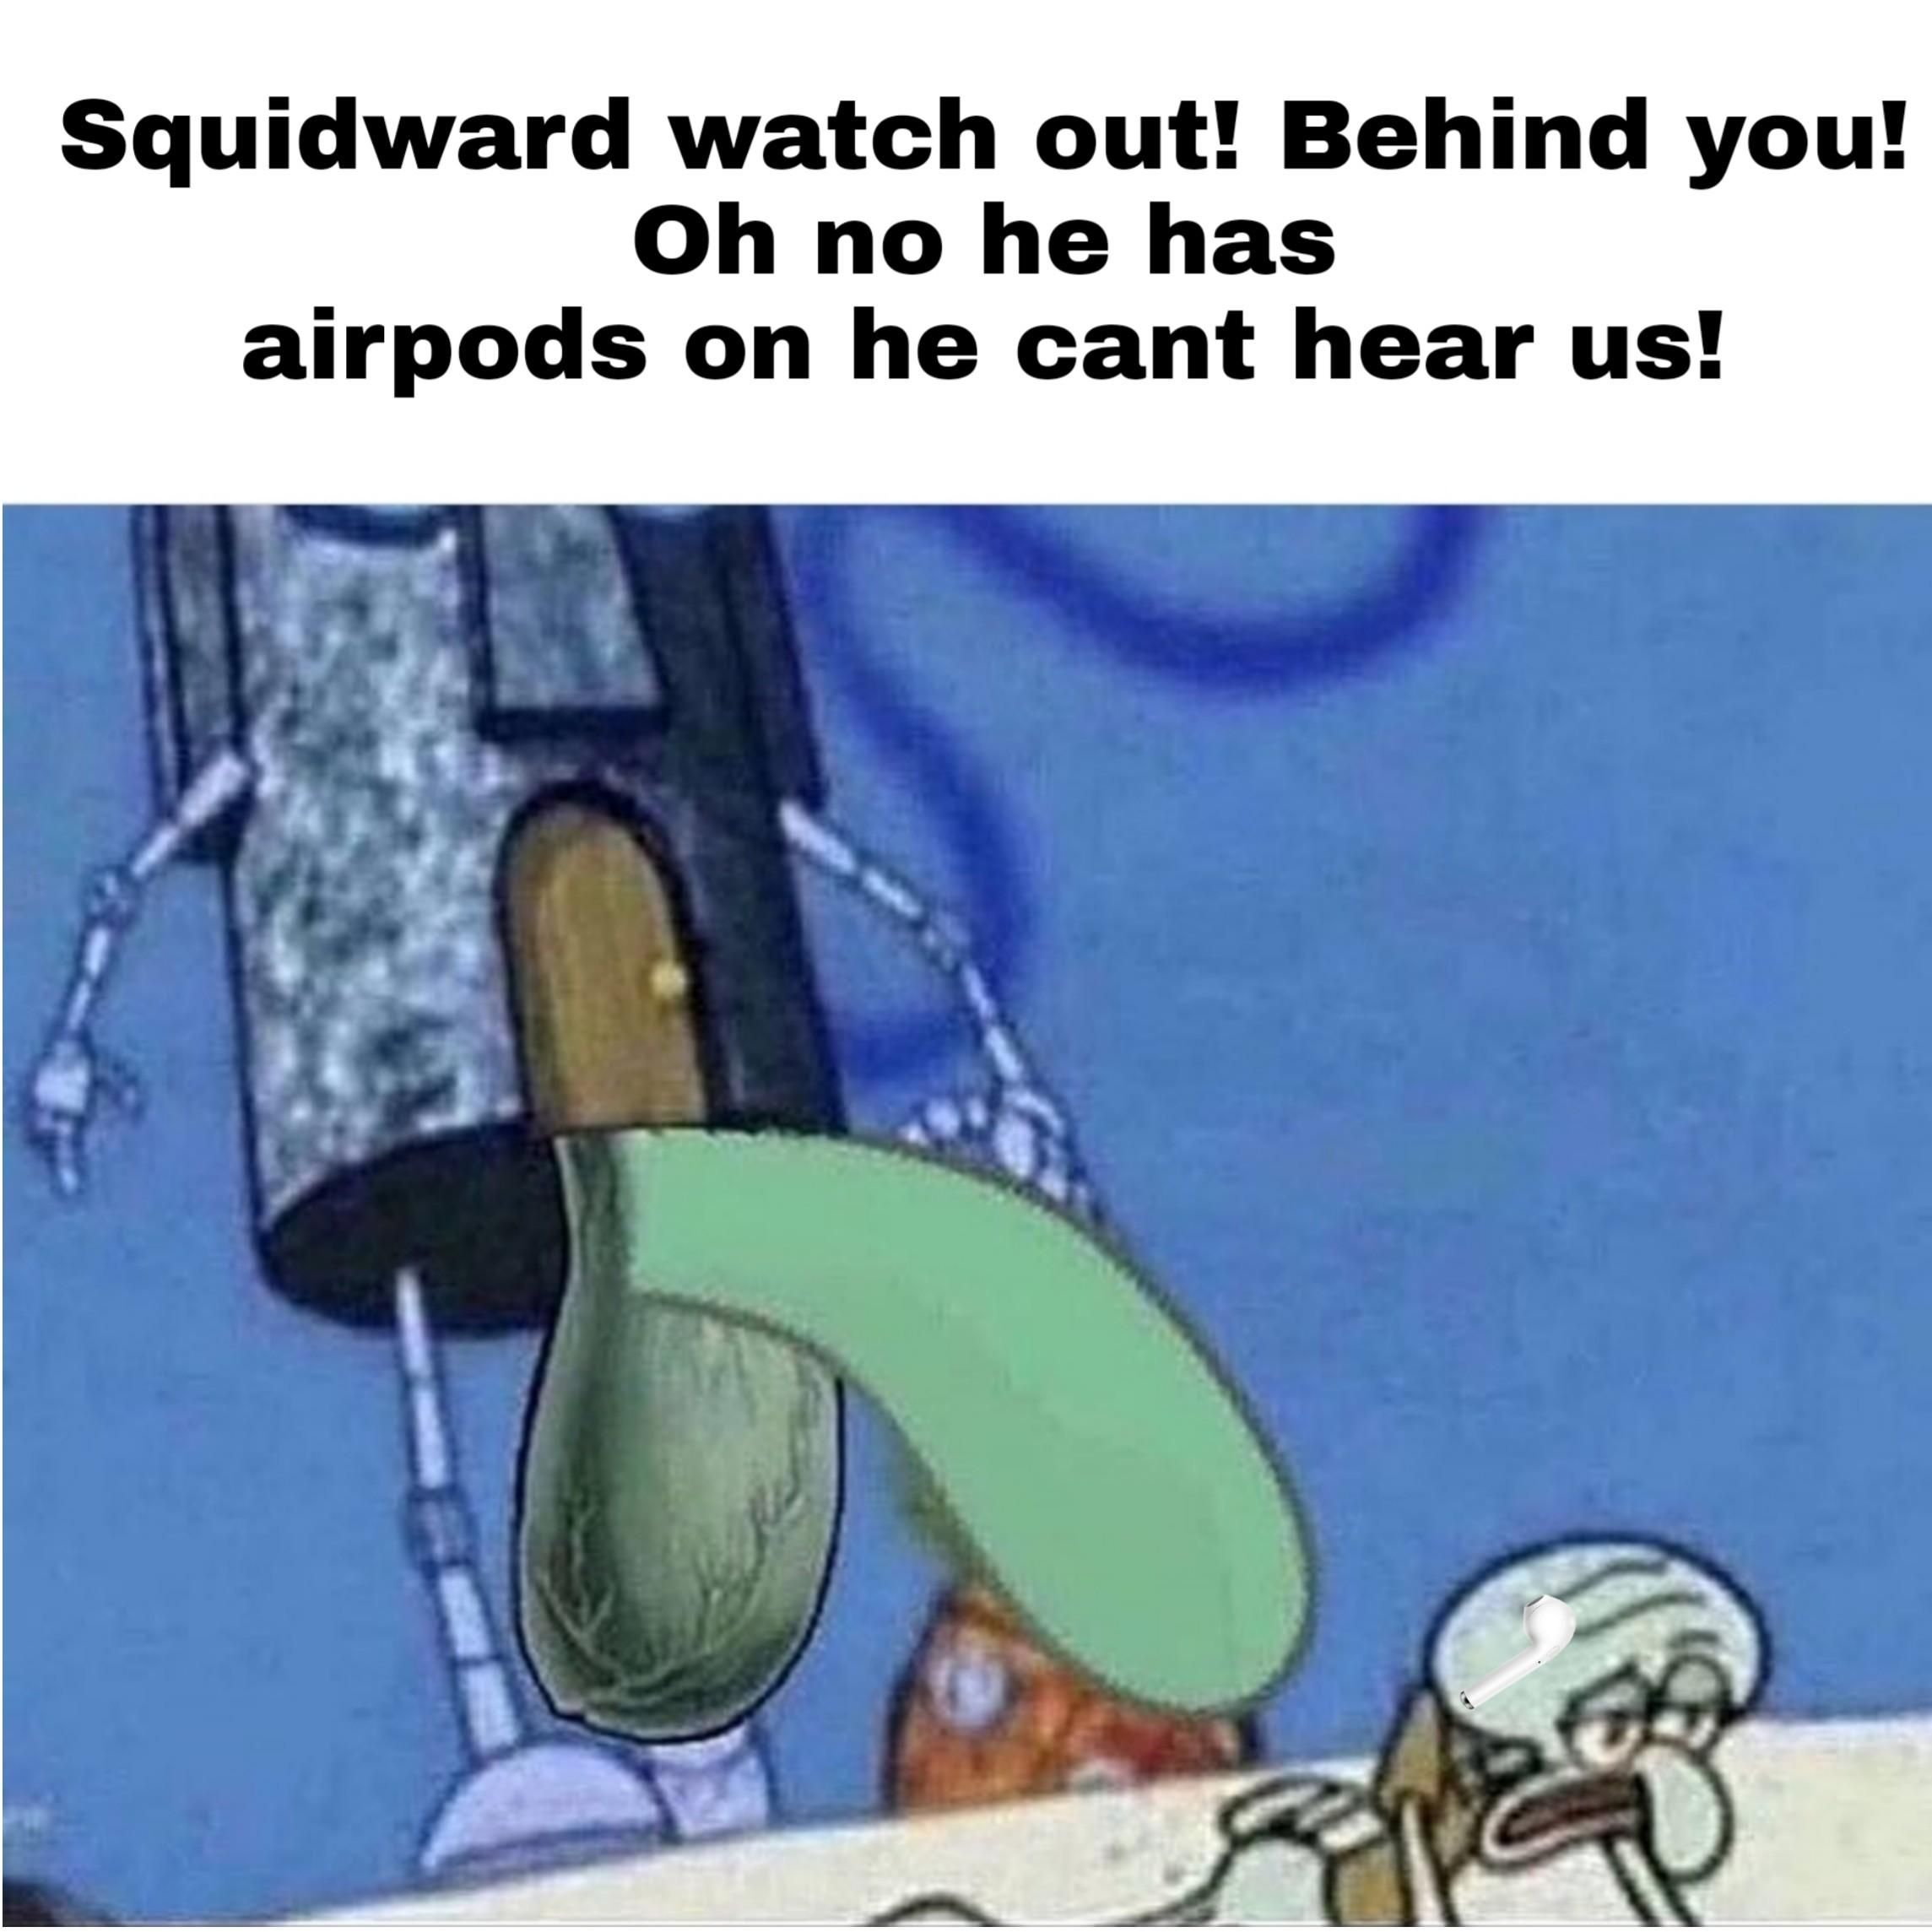 squidward get outta there! 